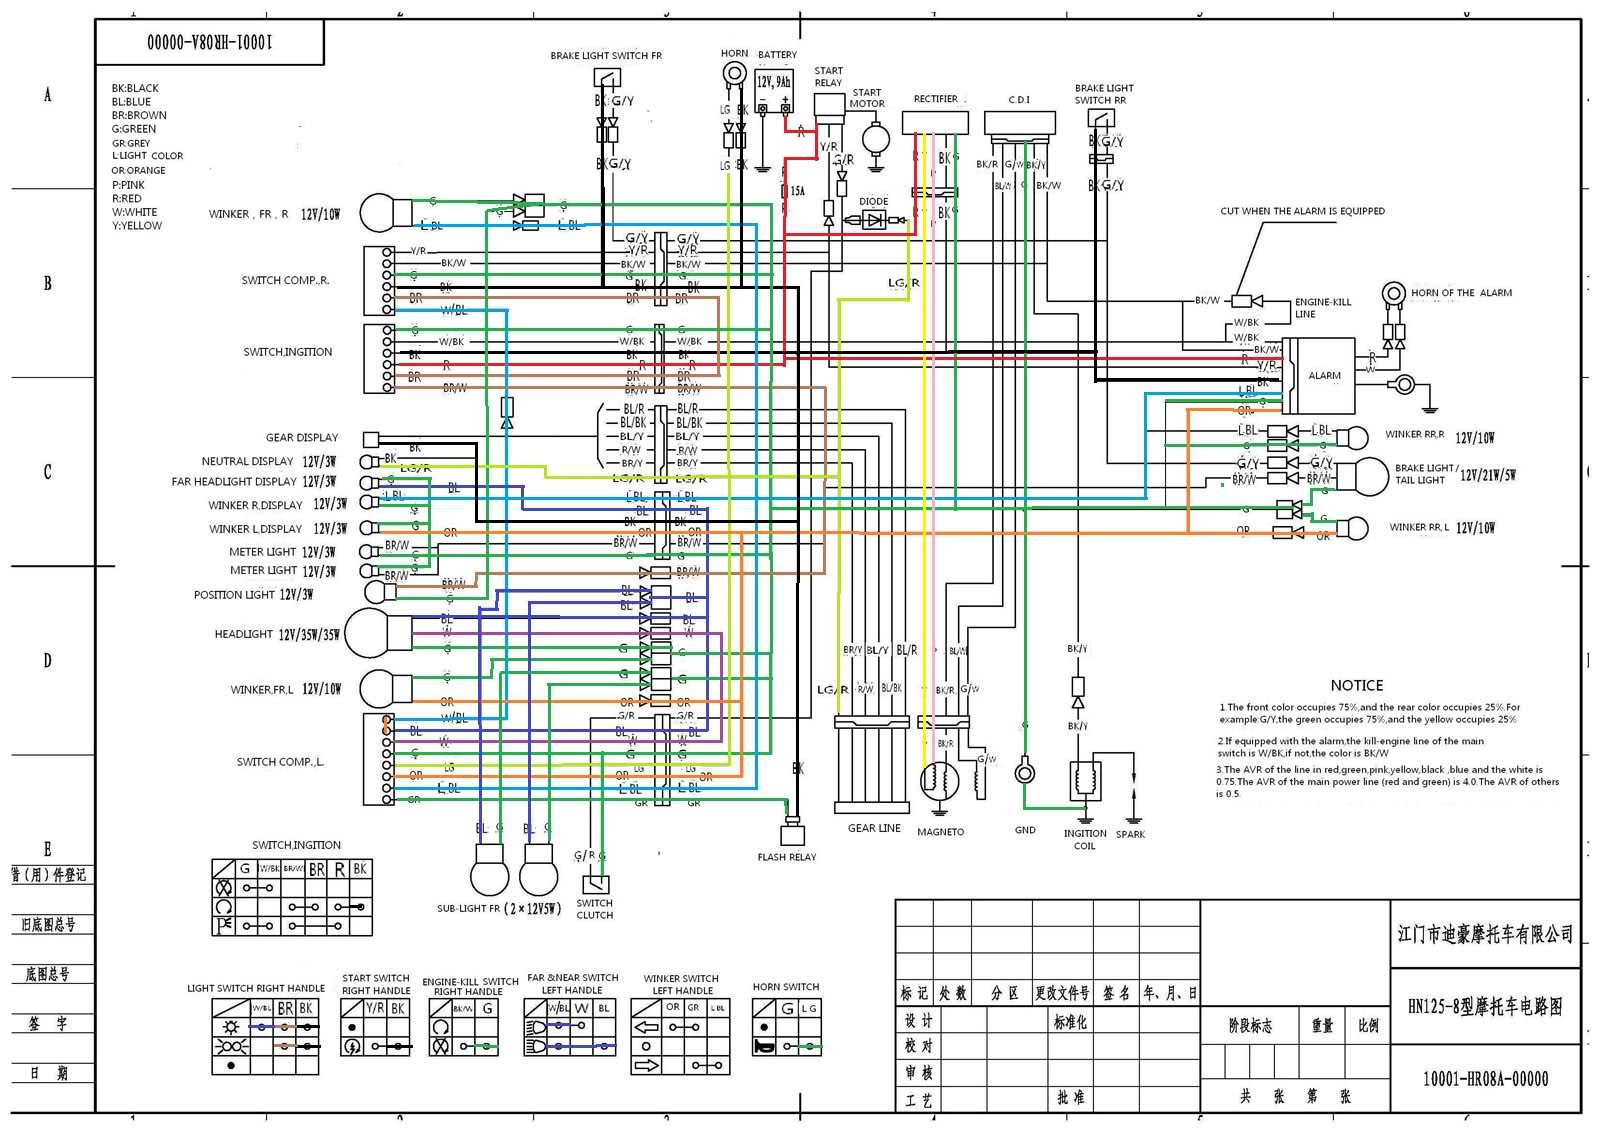 Lifan Motorcycle Wiring Diagram from mainetreasurechest.com